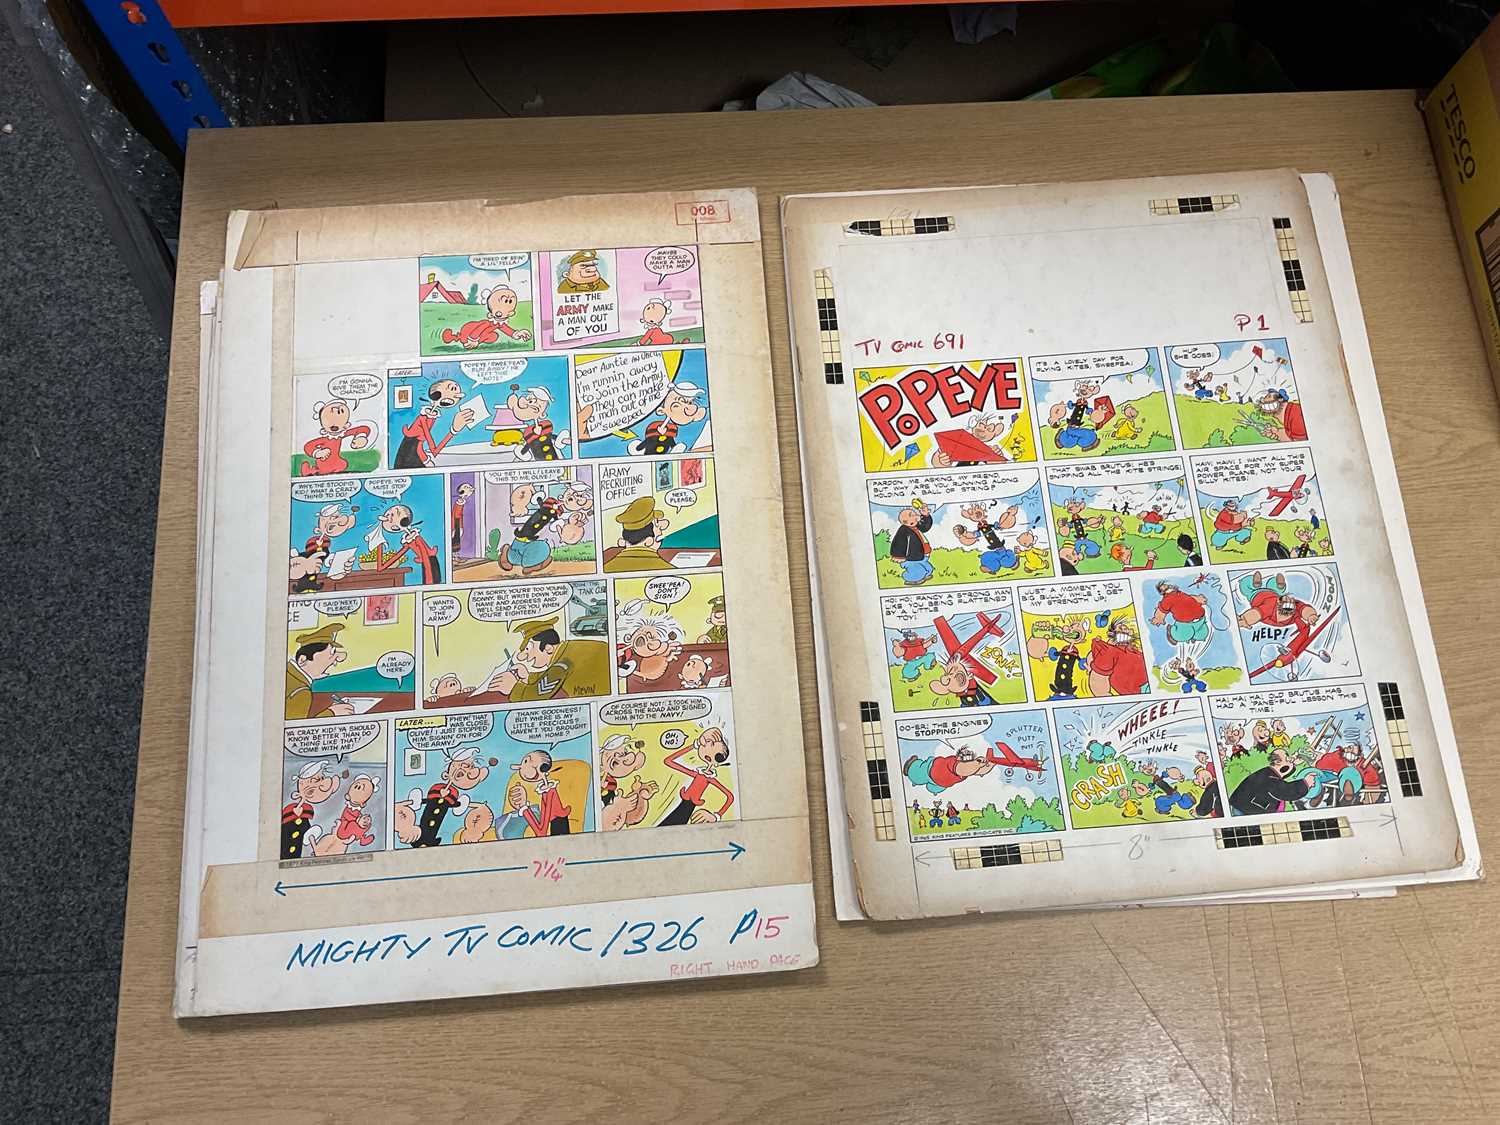 † BILL MEVIN; ten original storyboard cartoons for Popeye, some with annotated detail. Condition - Image 4 of 7